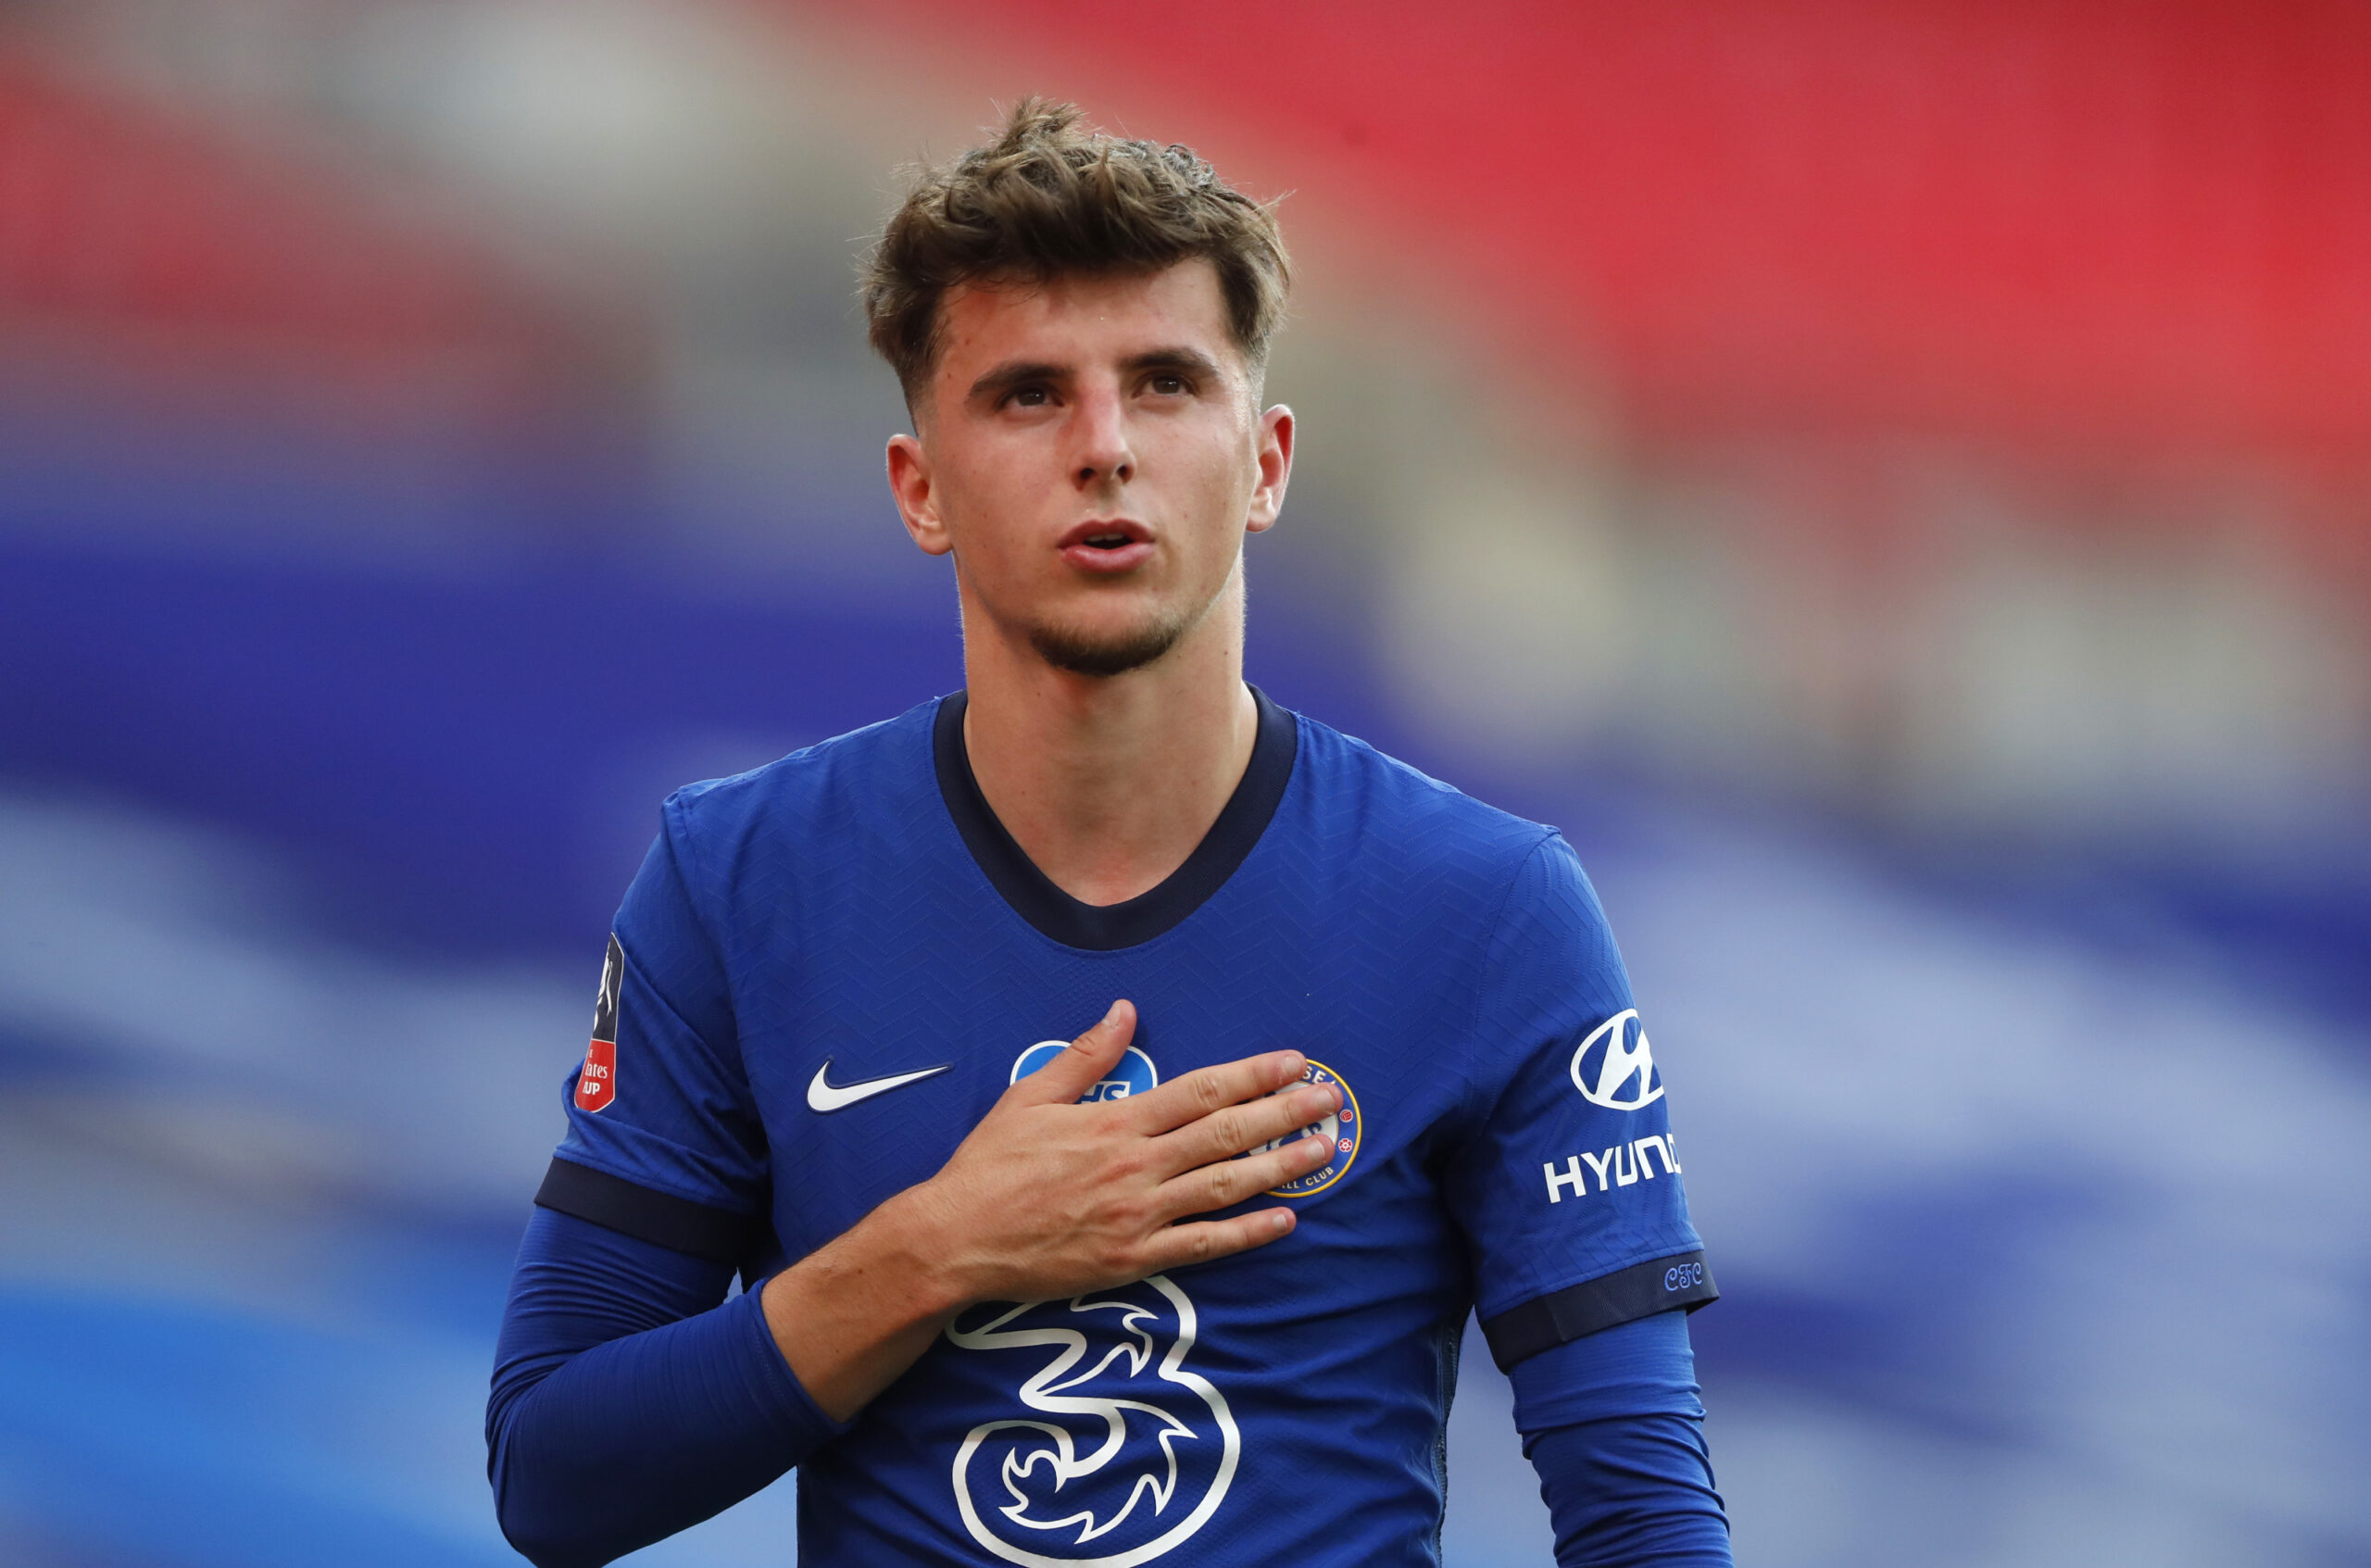 Mason Mount Age, Salary, Net worth, Current Teams, Career, Height, and much more